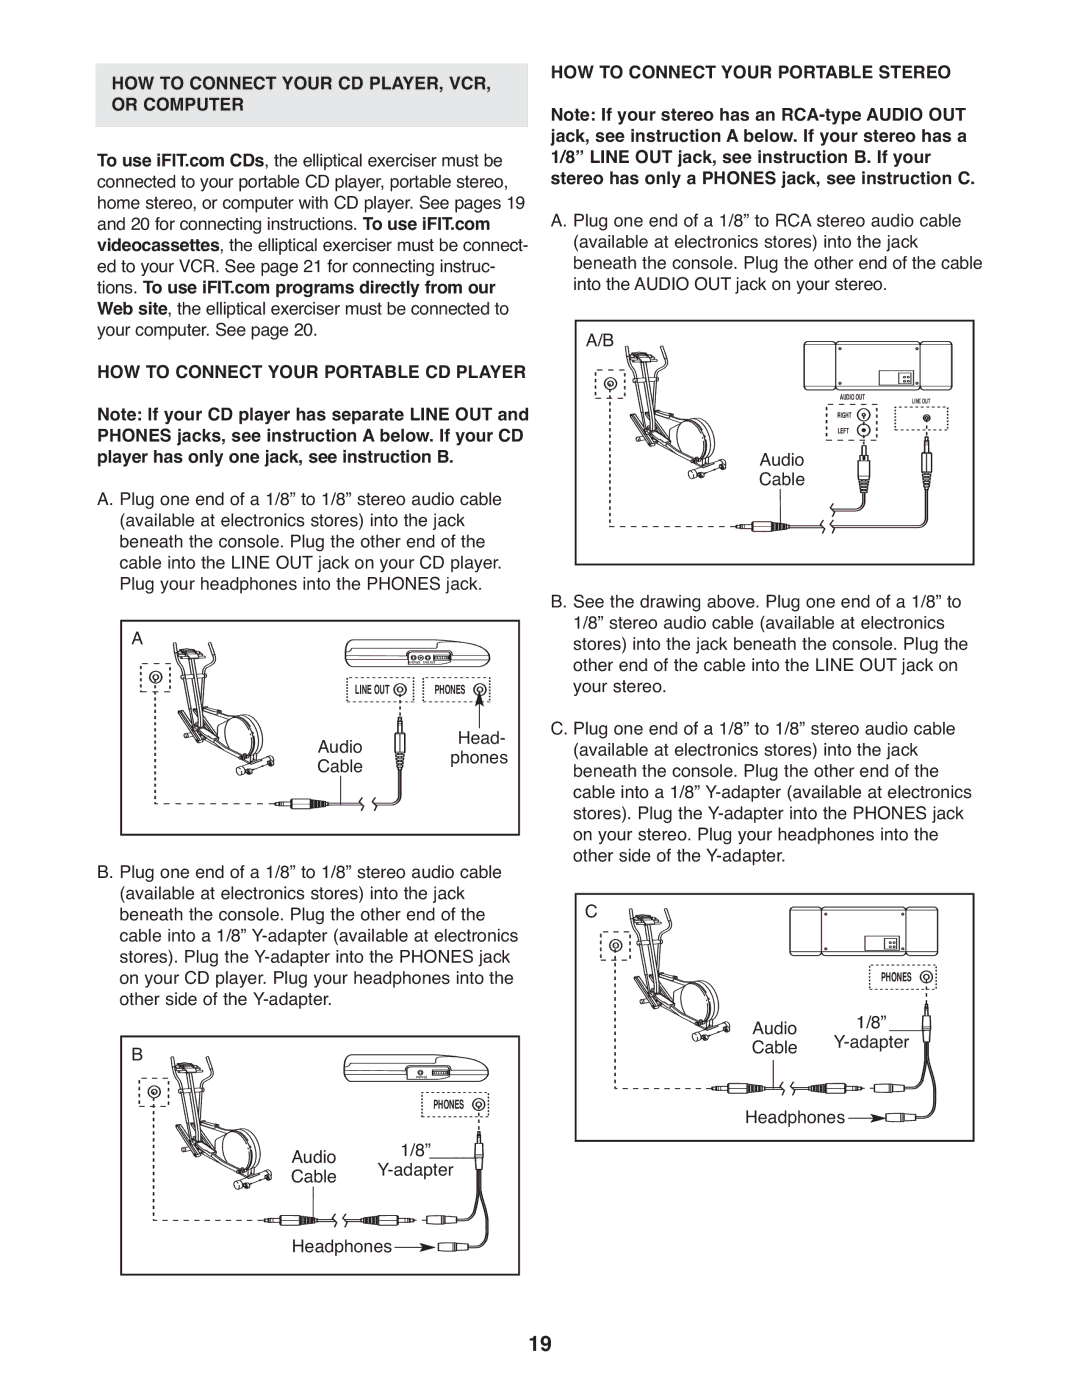 ProForm 831.28544.2 user manual HOW to Connect Your CD PLAYER, VCR, or Computer, Audio, Cable 